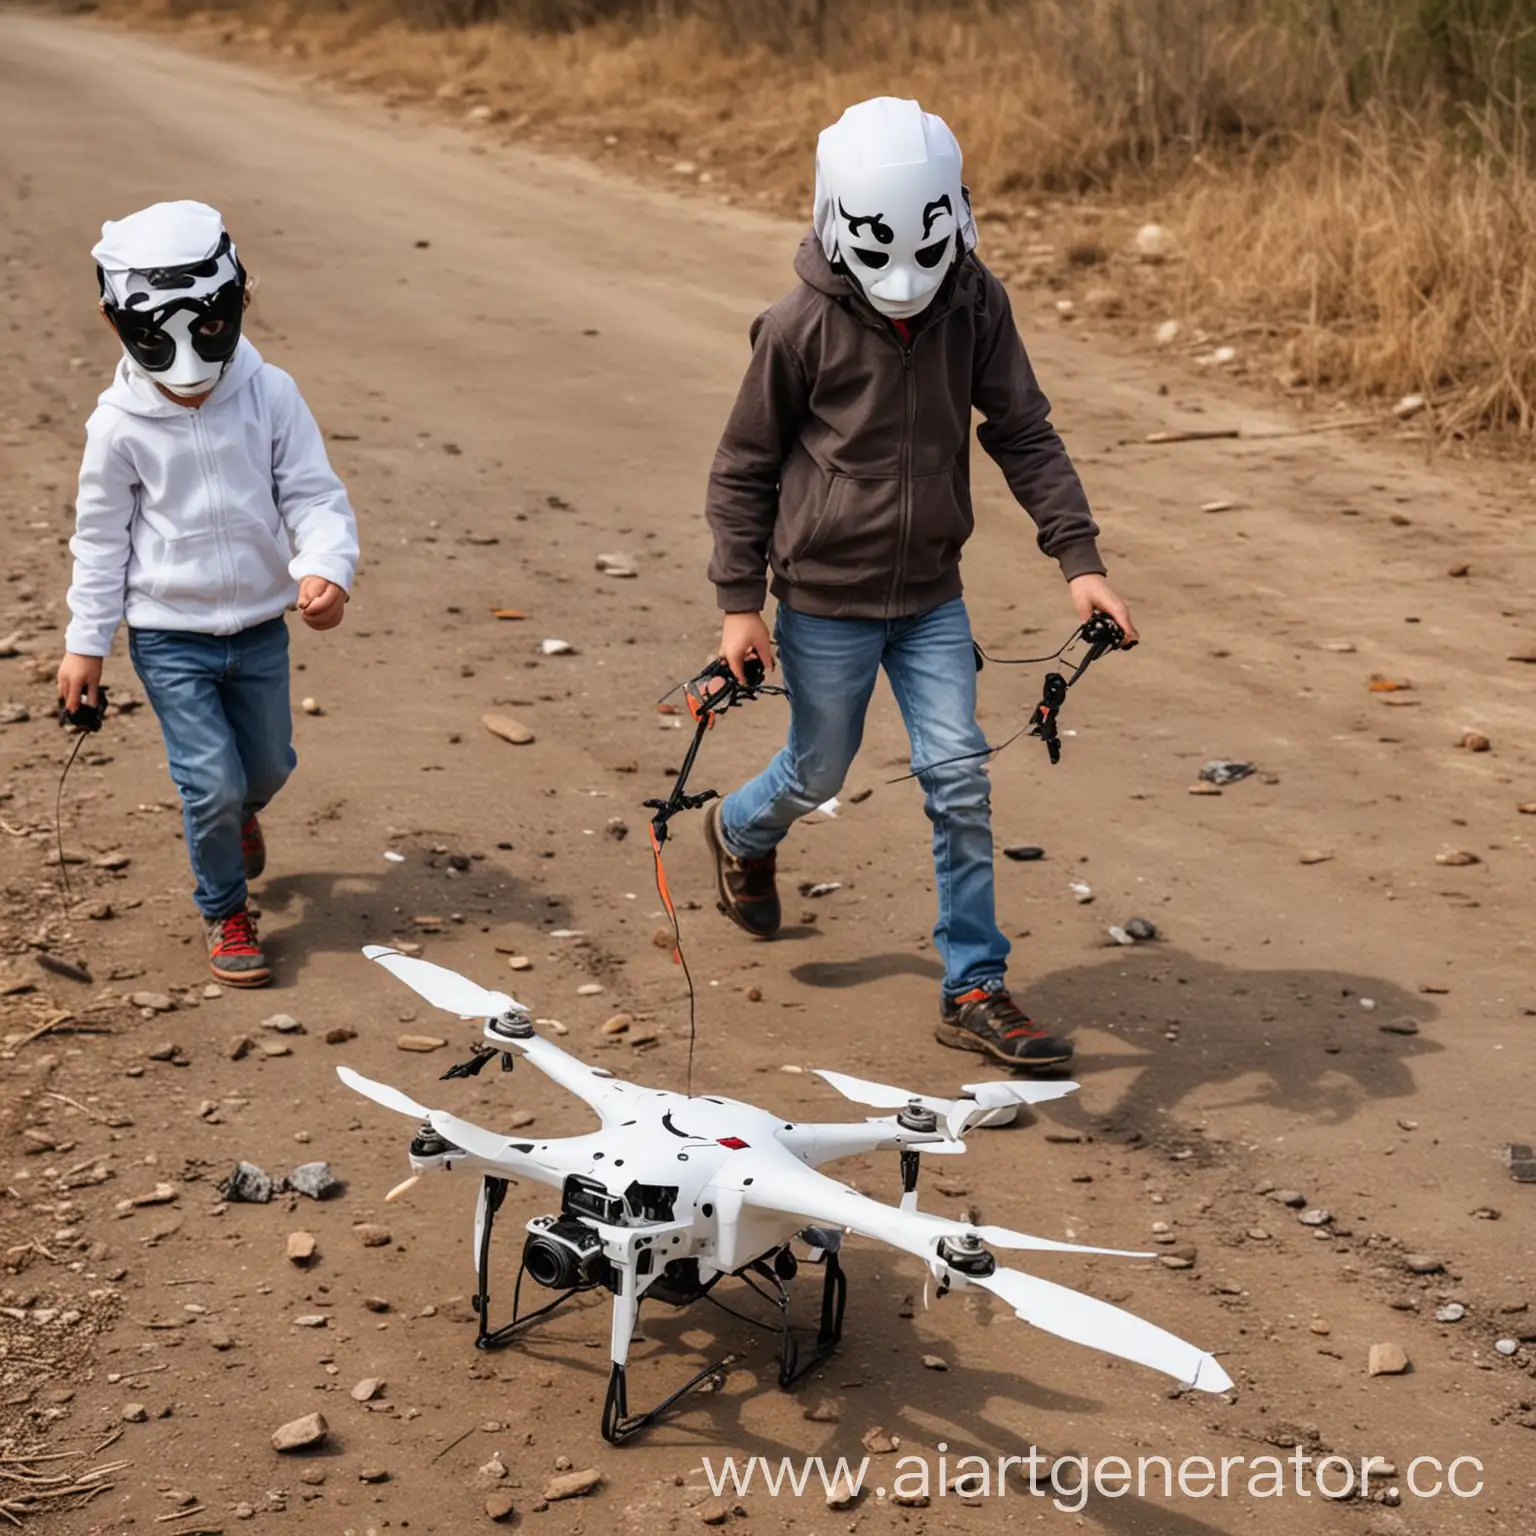 Playful-Children-in-Animal-Masks-with-a-Broken-Drone